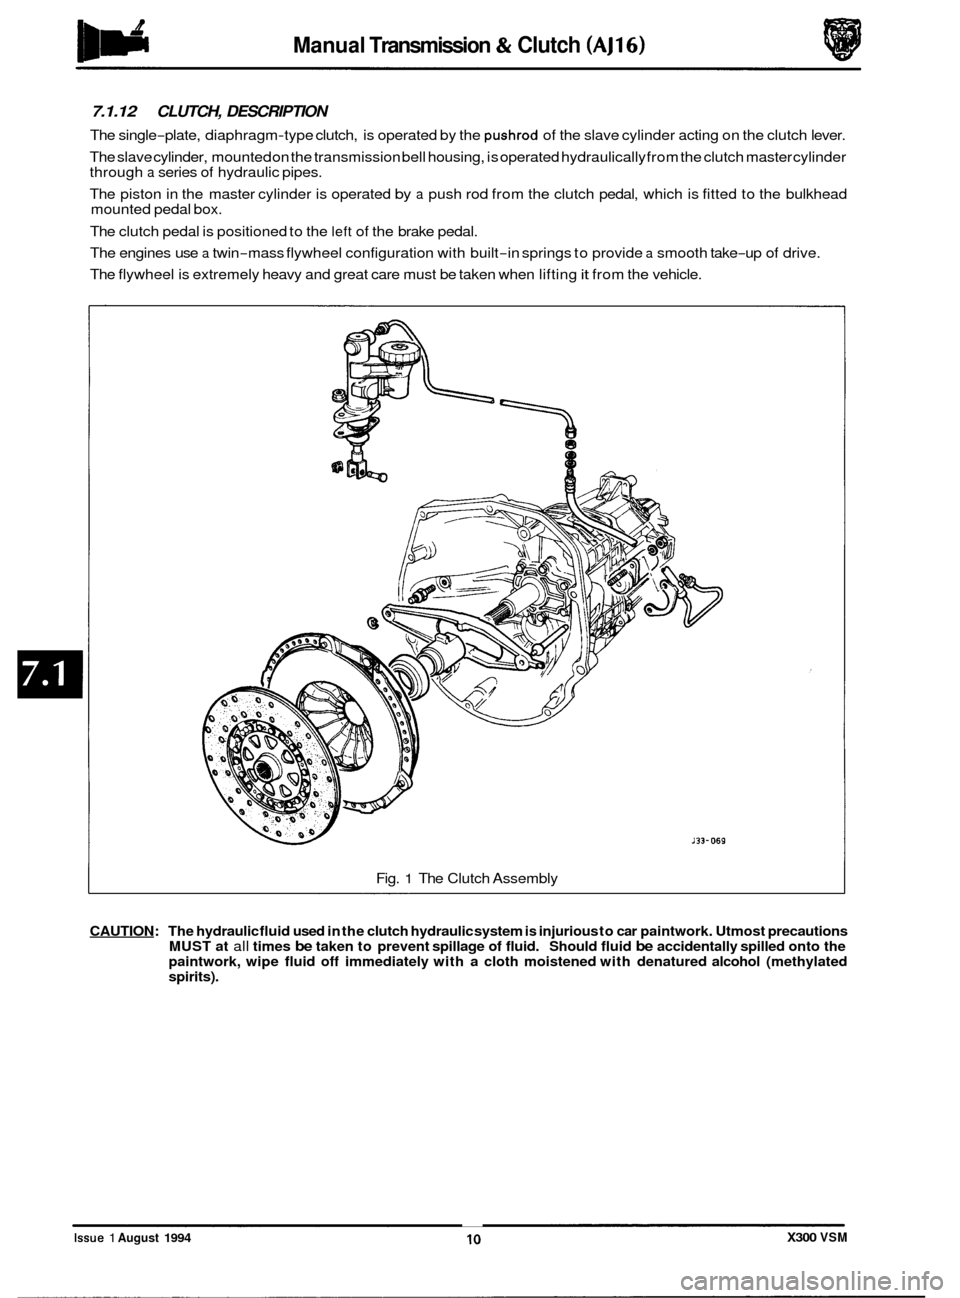 JAGUAR XJ6 1994 2.G Workshop Manual Manual Transmission & Clutch (AJ16) 
7.1.12 CLUTCH,  DESCRIPTION 
The single-plate,  diaphragm-type clutch,  is operated  by the pushrod of the slave  cylinder acting on the clutch  lever. 
The  slave